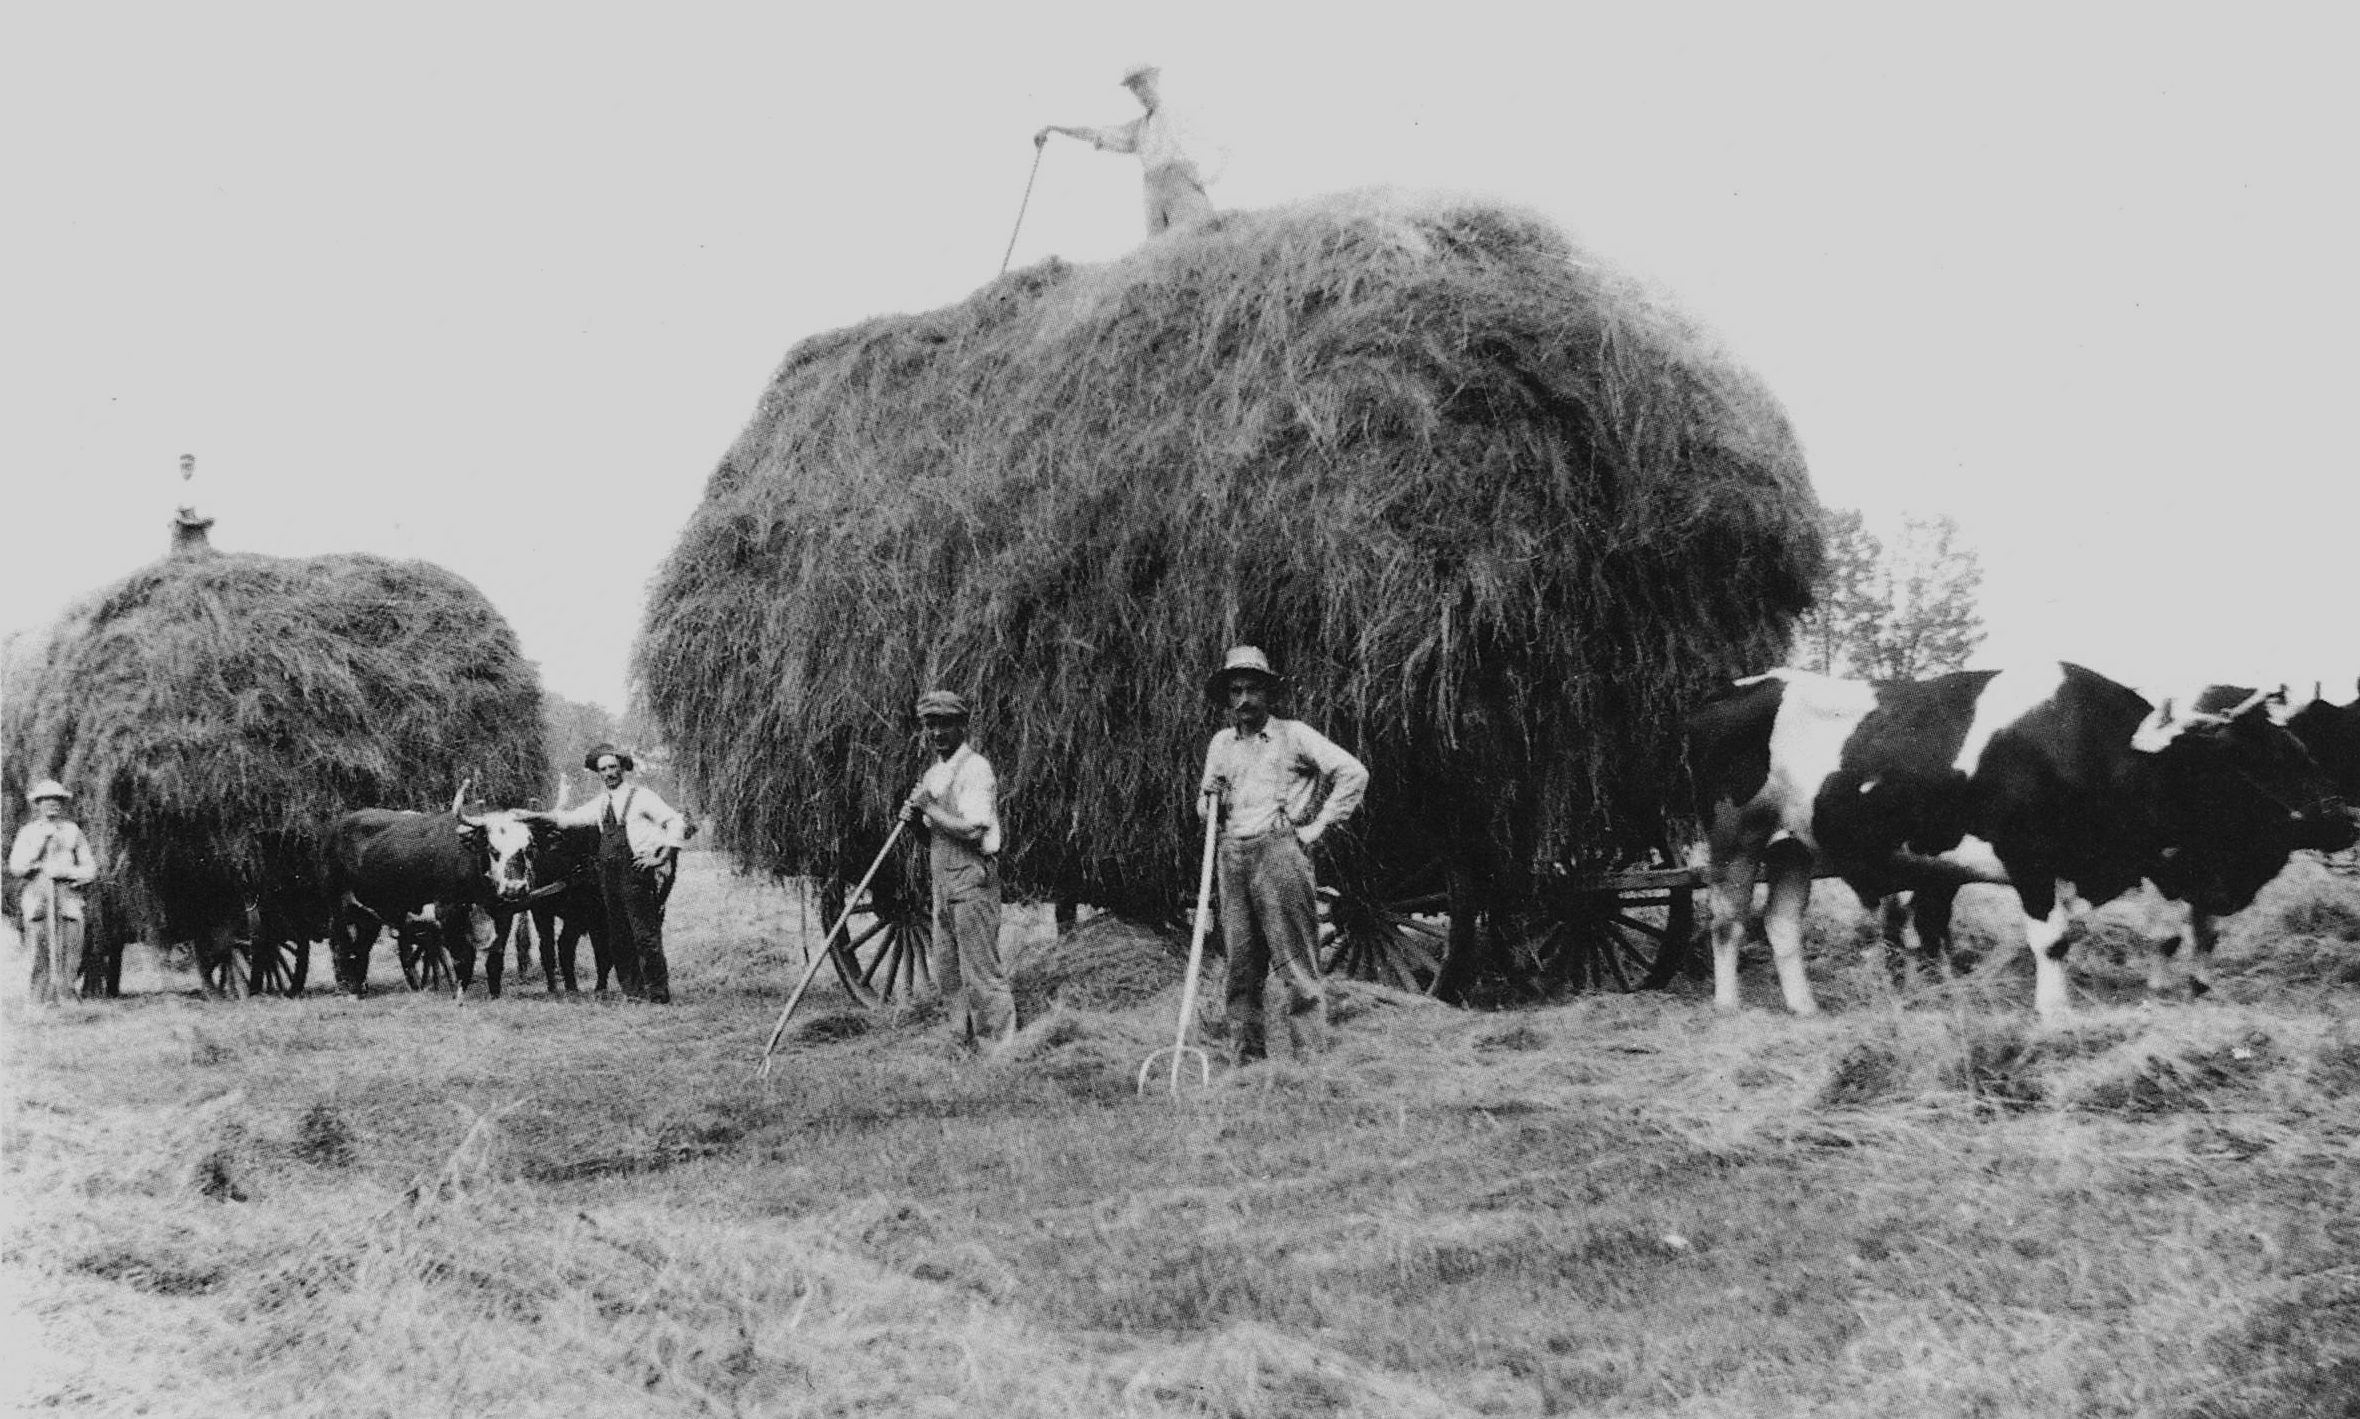 Hired hands at the North Field of the Canterbury Shaker Village, NH around 1920